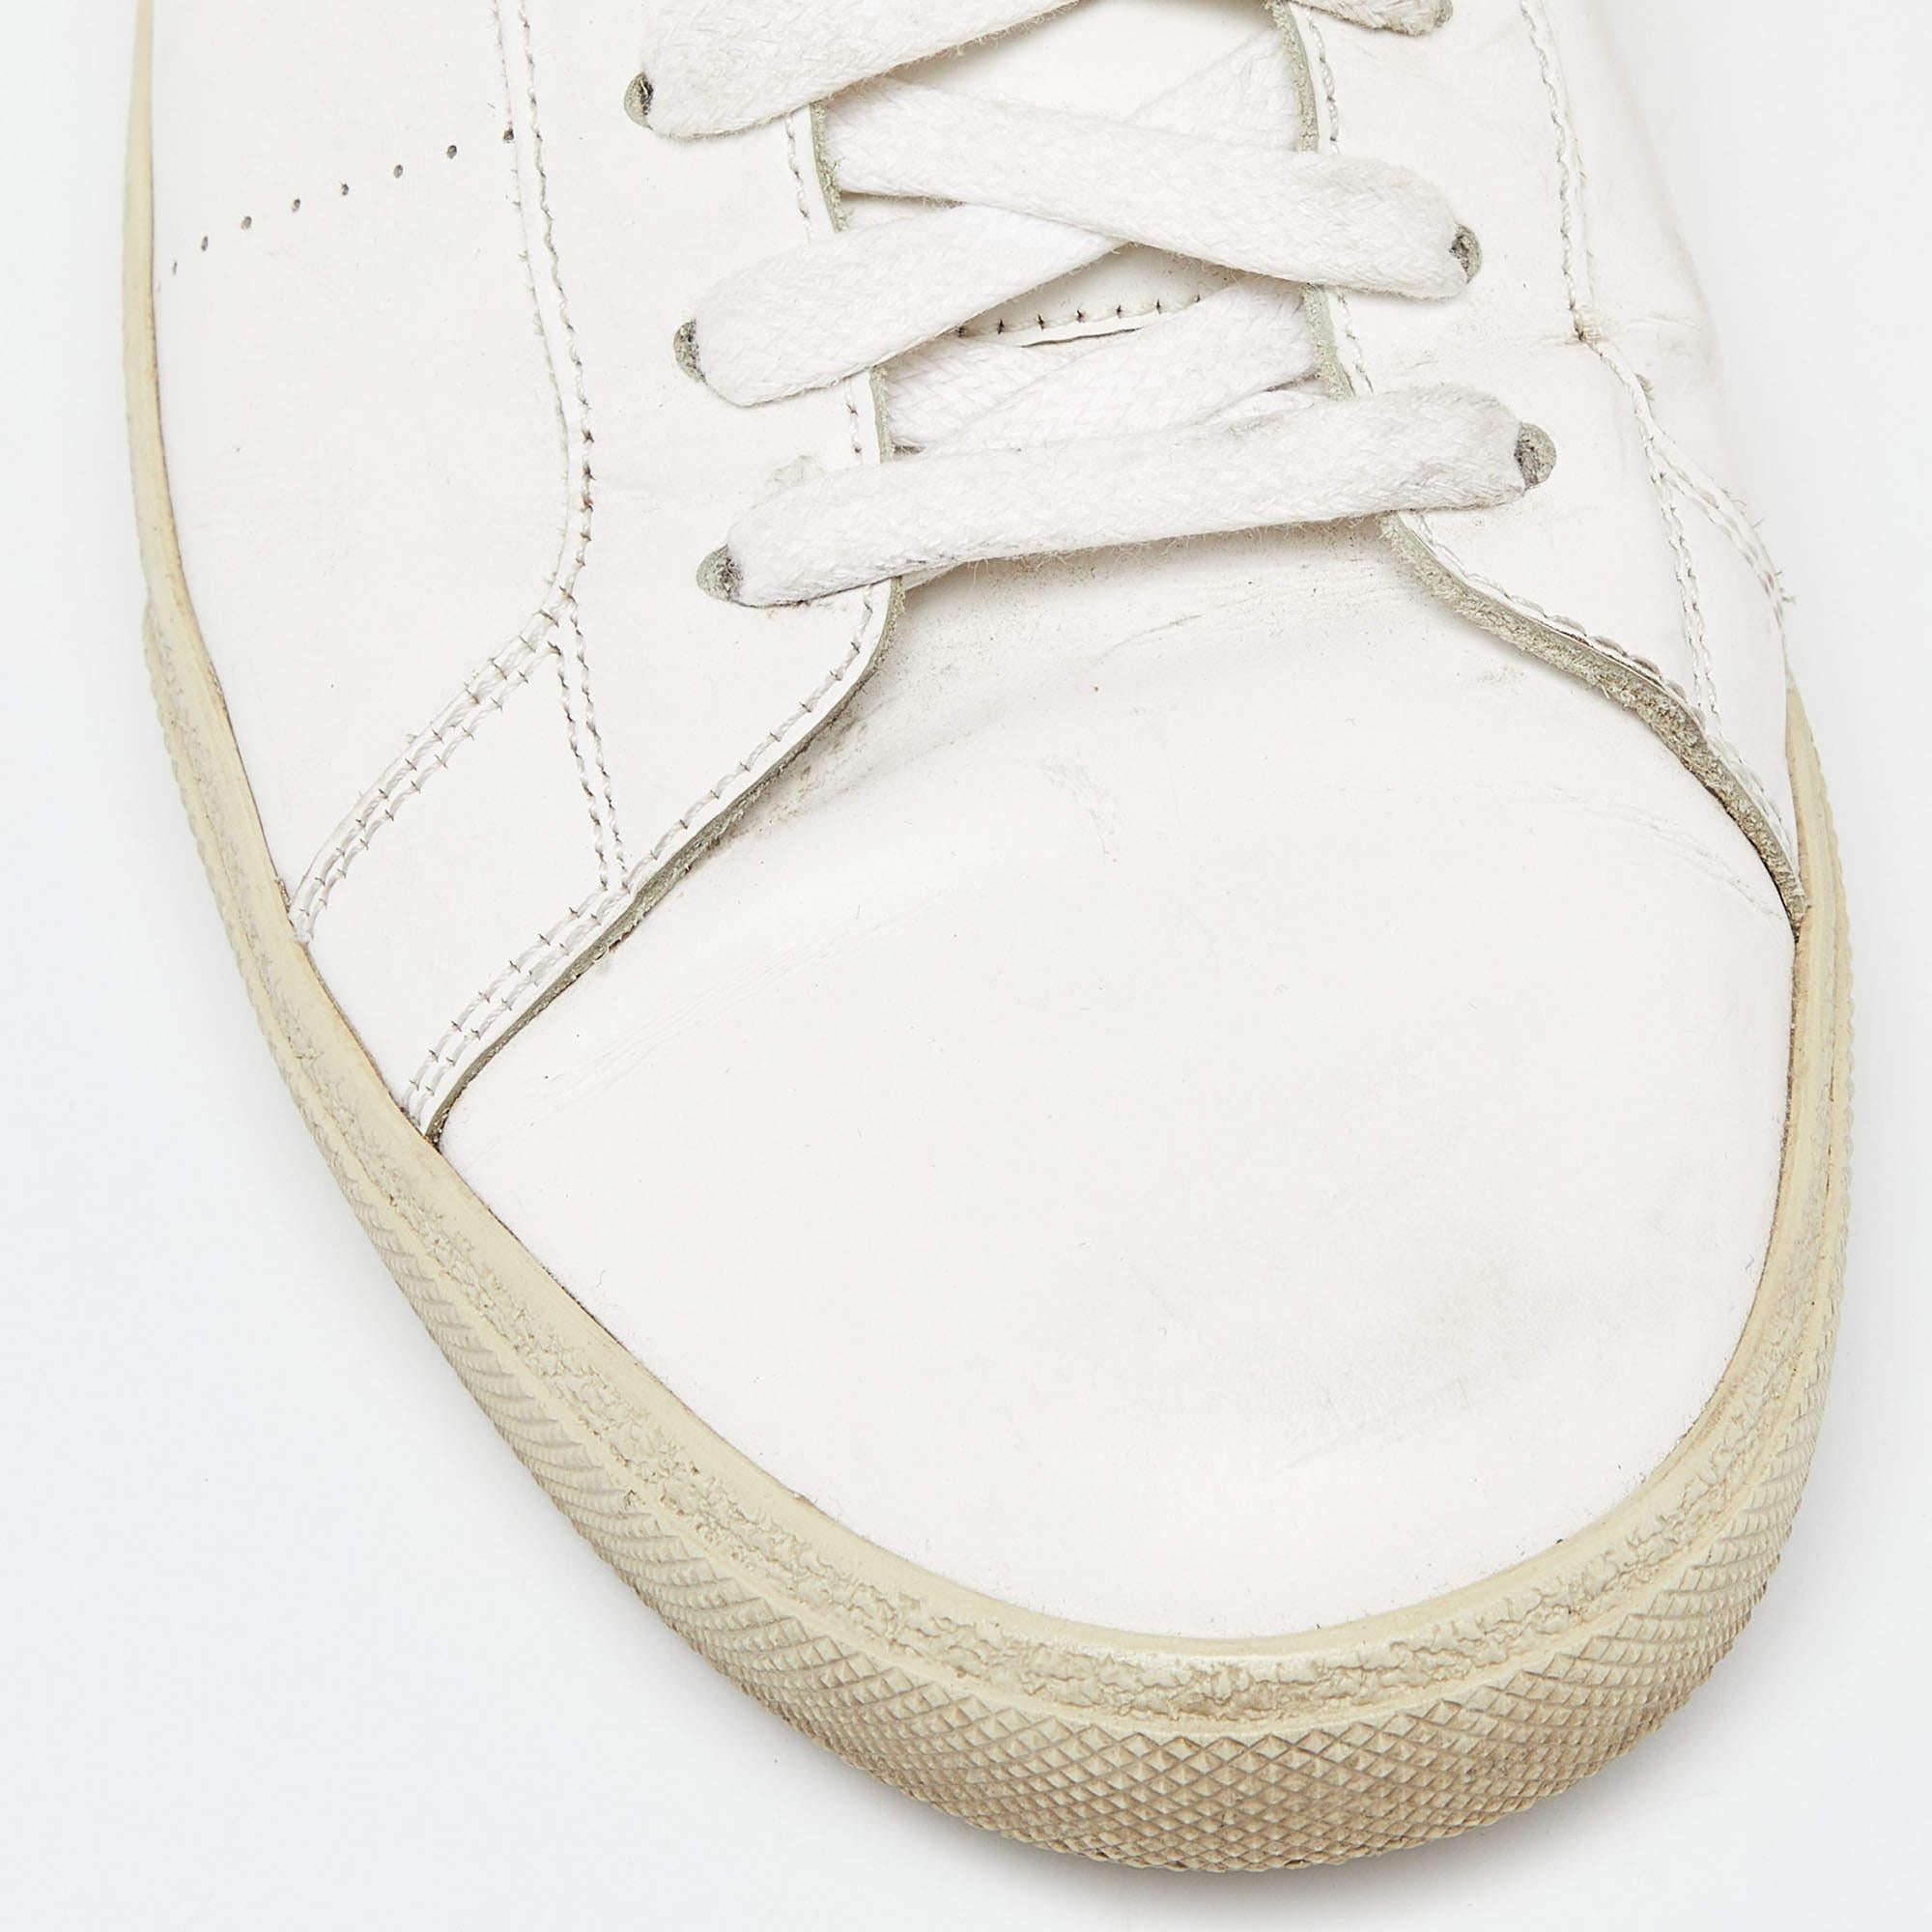 Saint Laurent White Leather Lace Up Sneakers Size 43 1